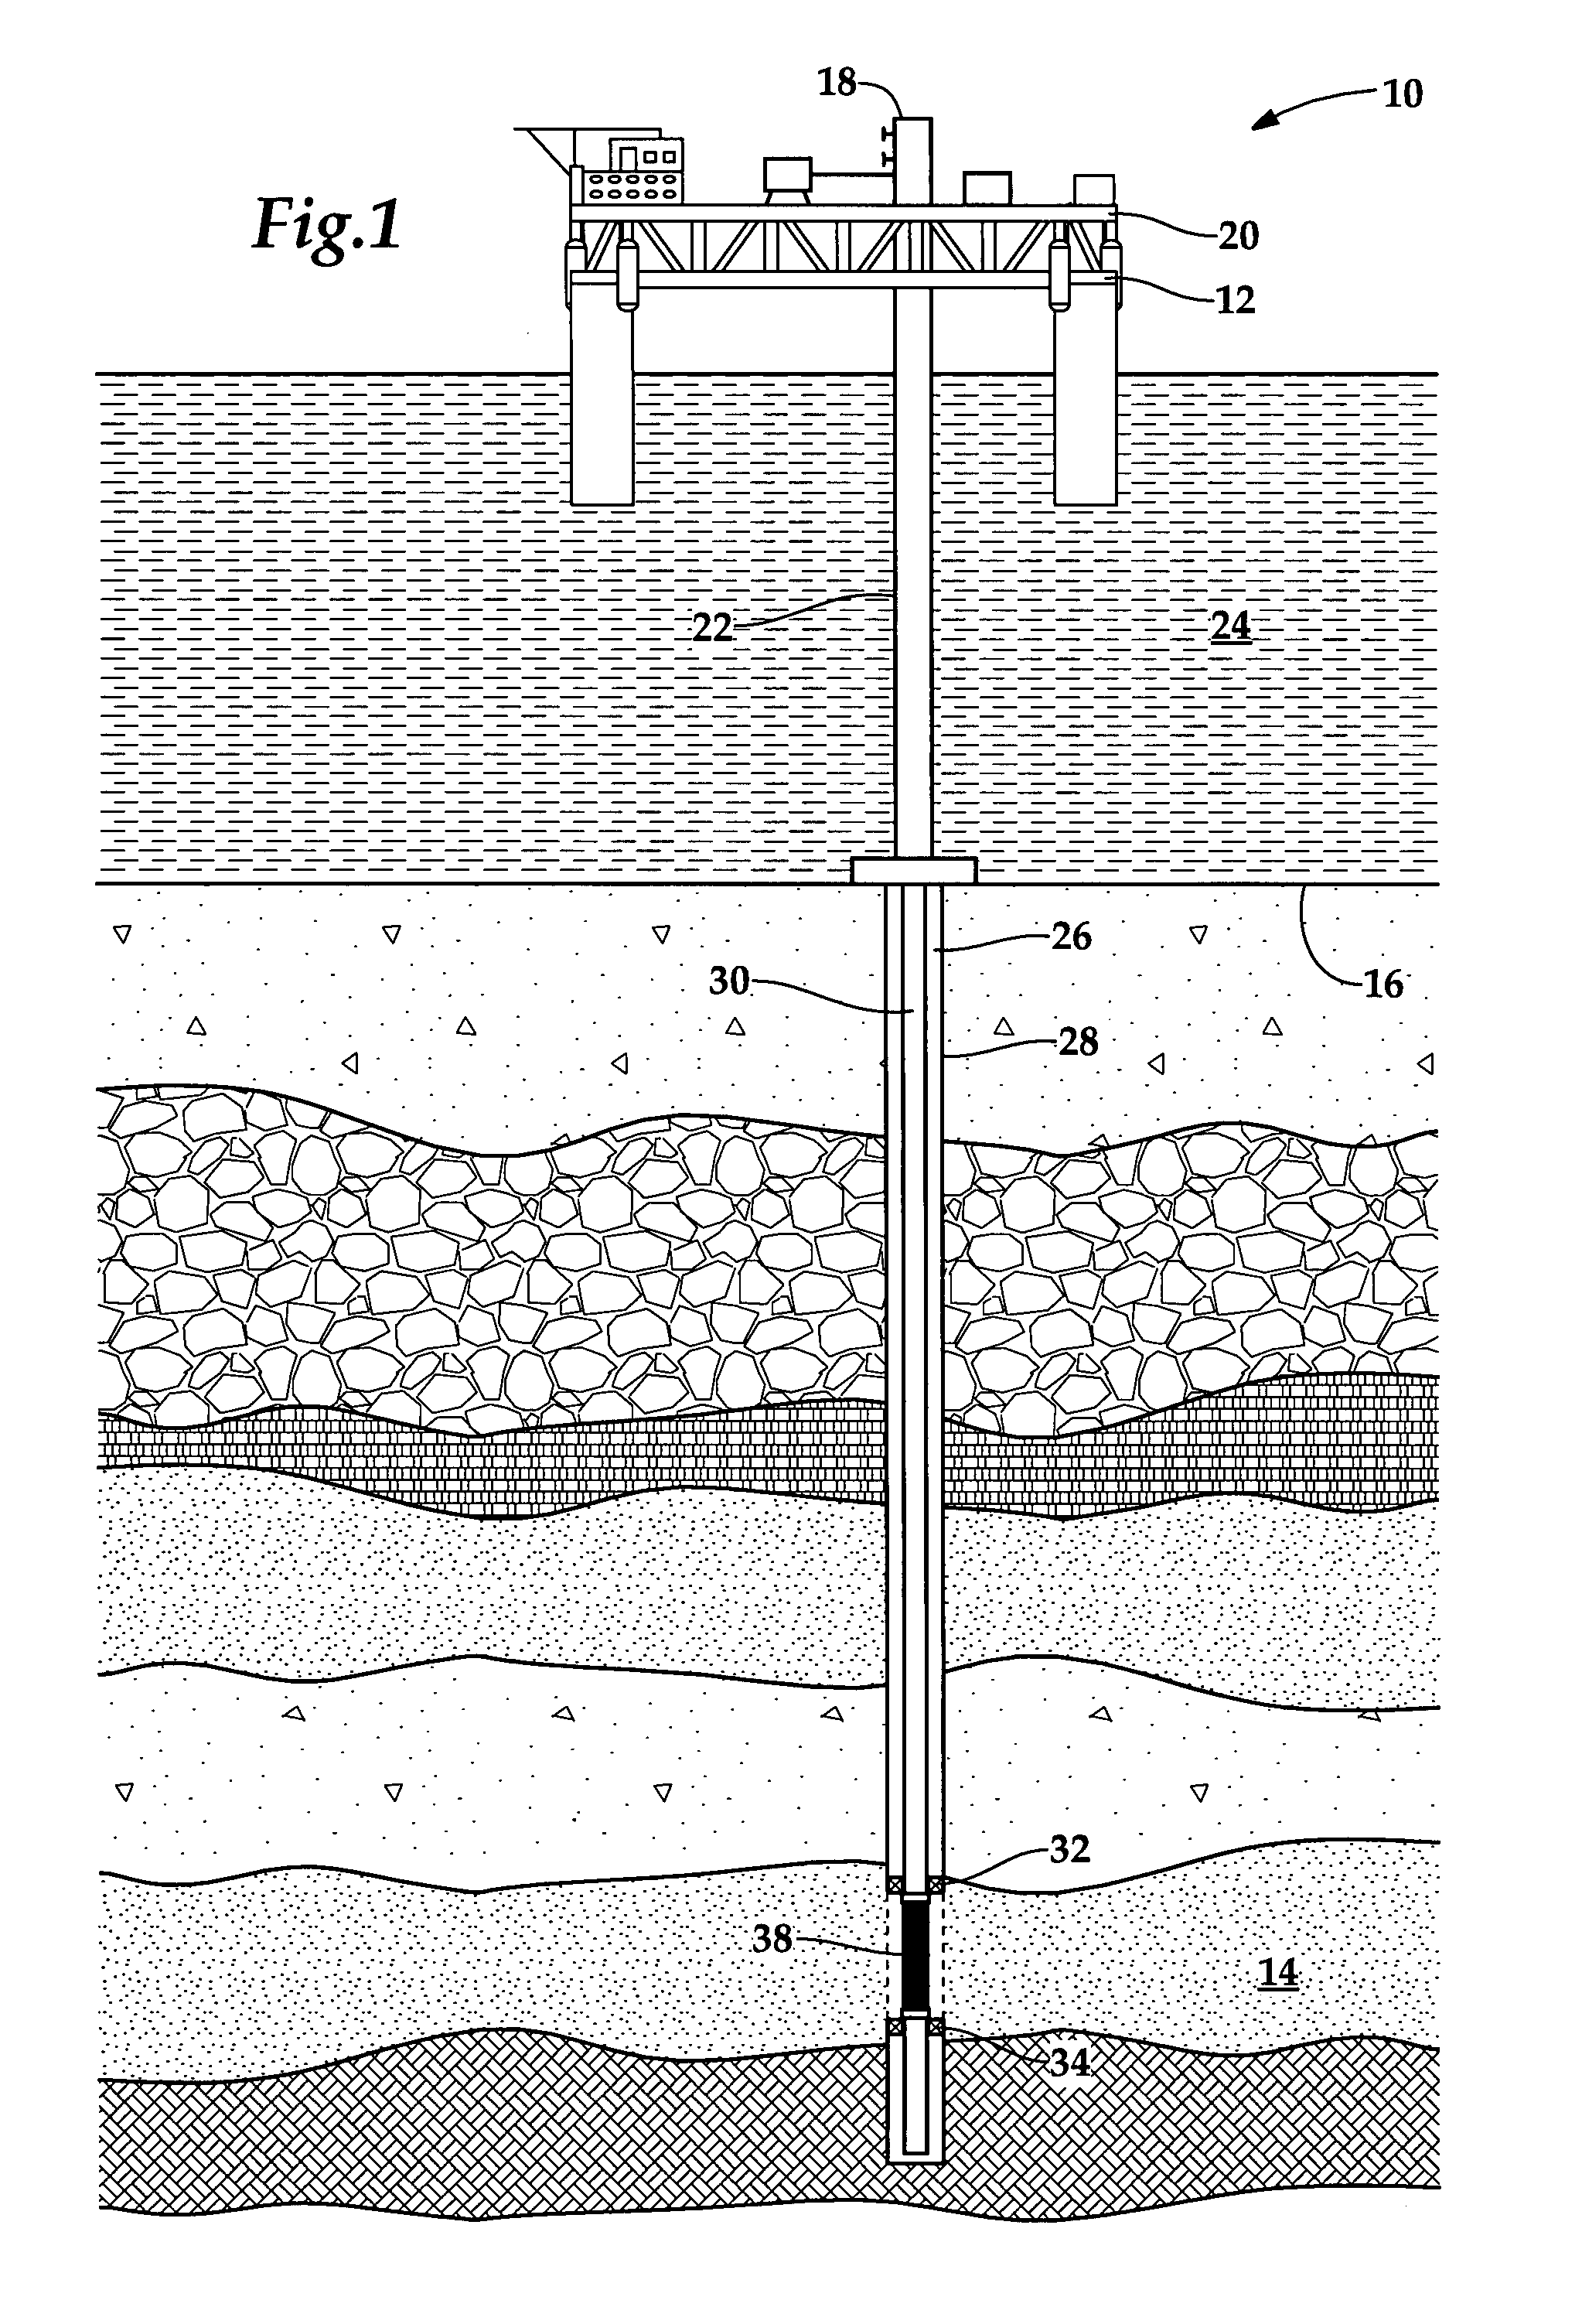 Sand control screen having a micro-perforated filtration layer